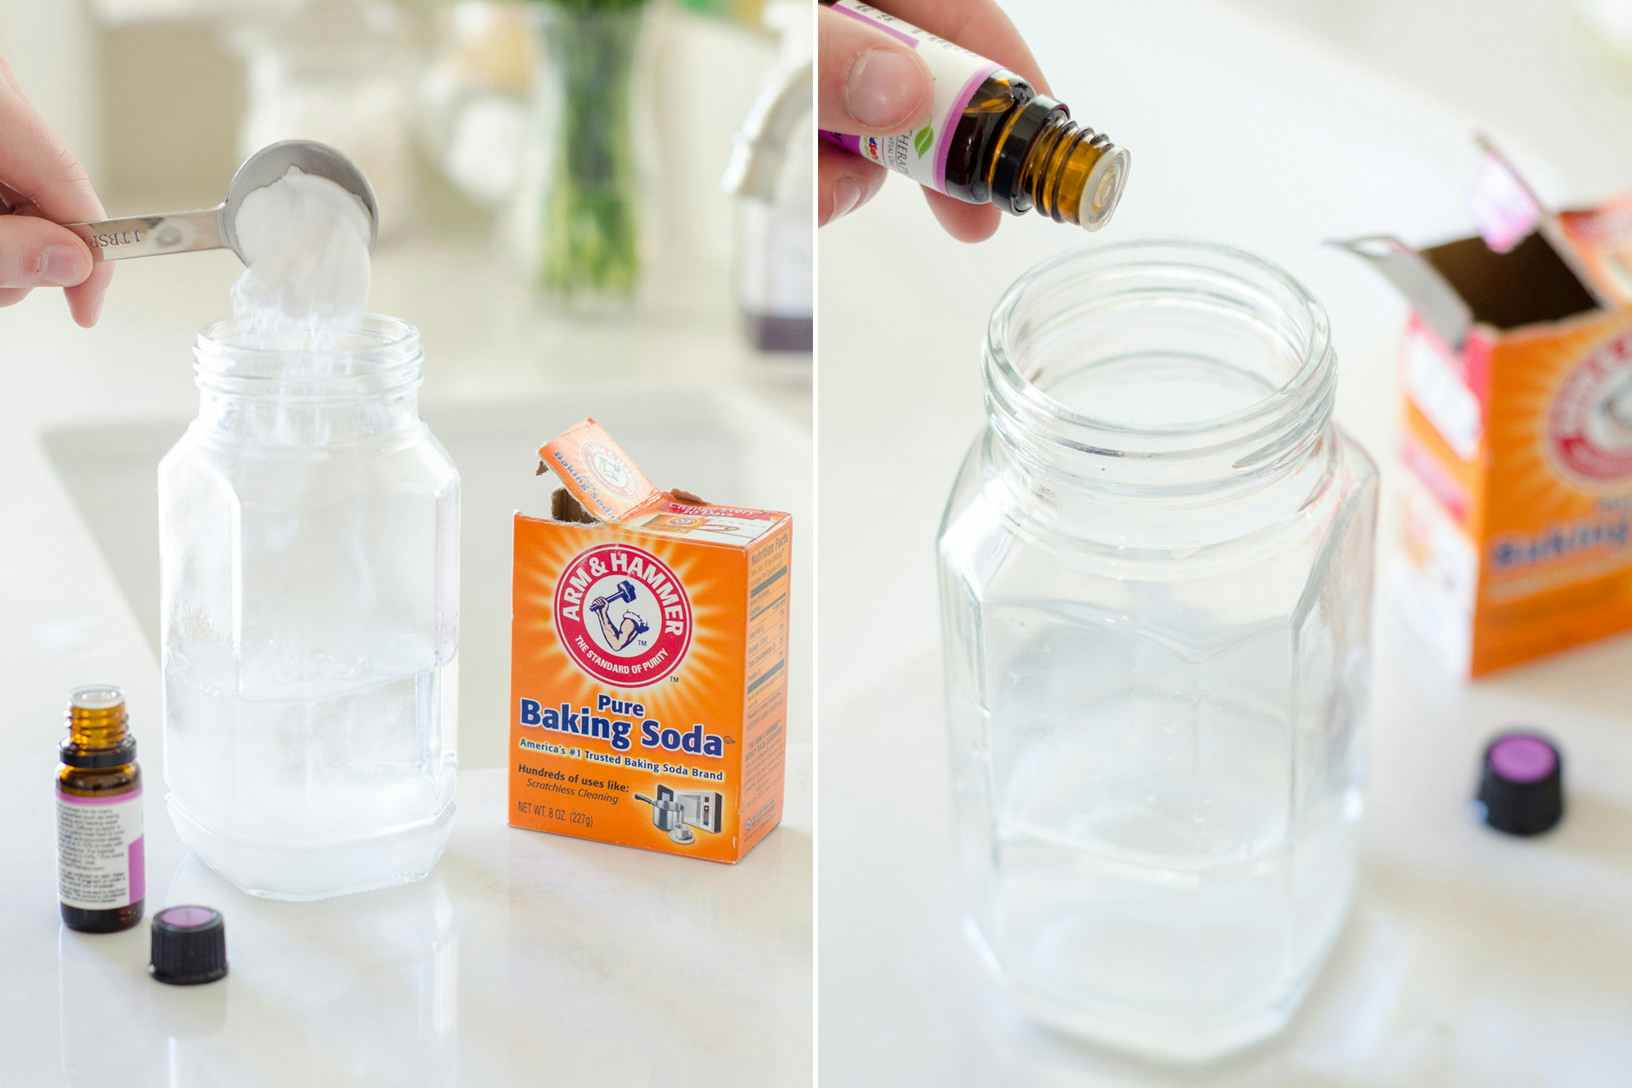 Mix baking soda, distilled water and essential oil for a bathroom air freshener.